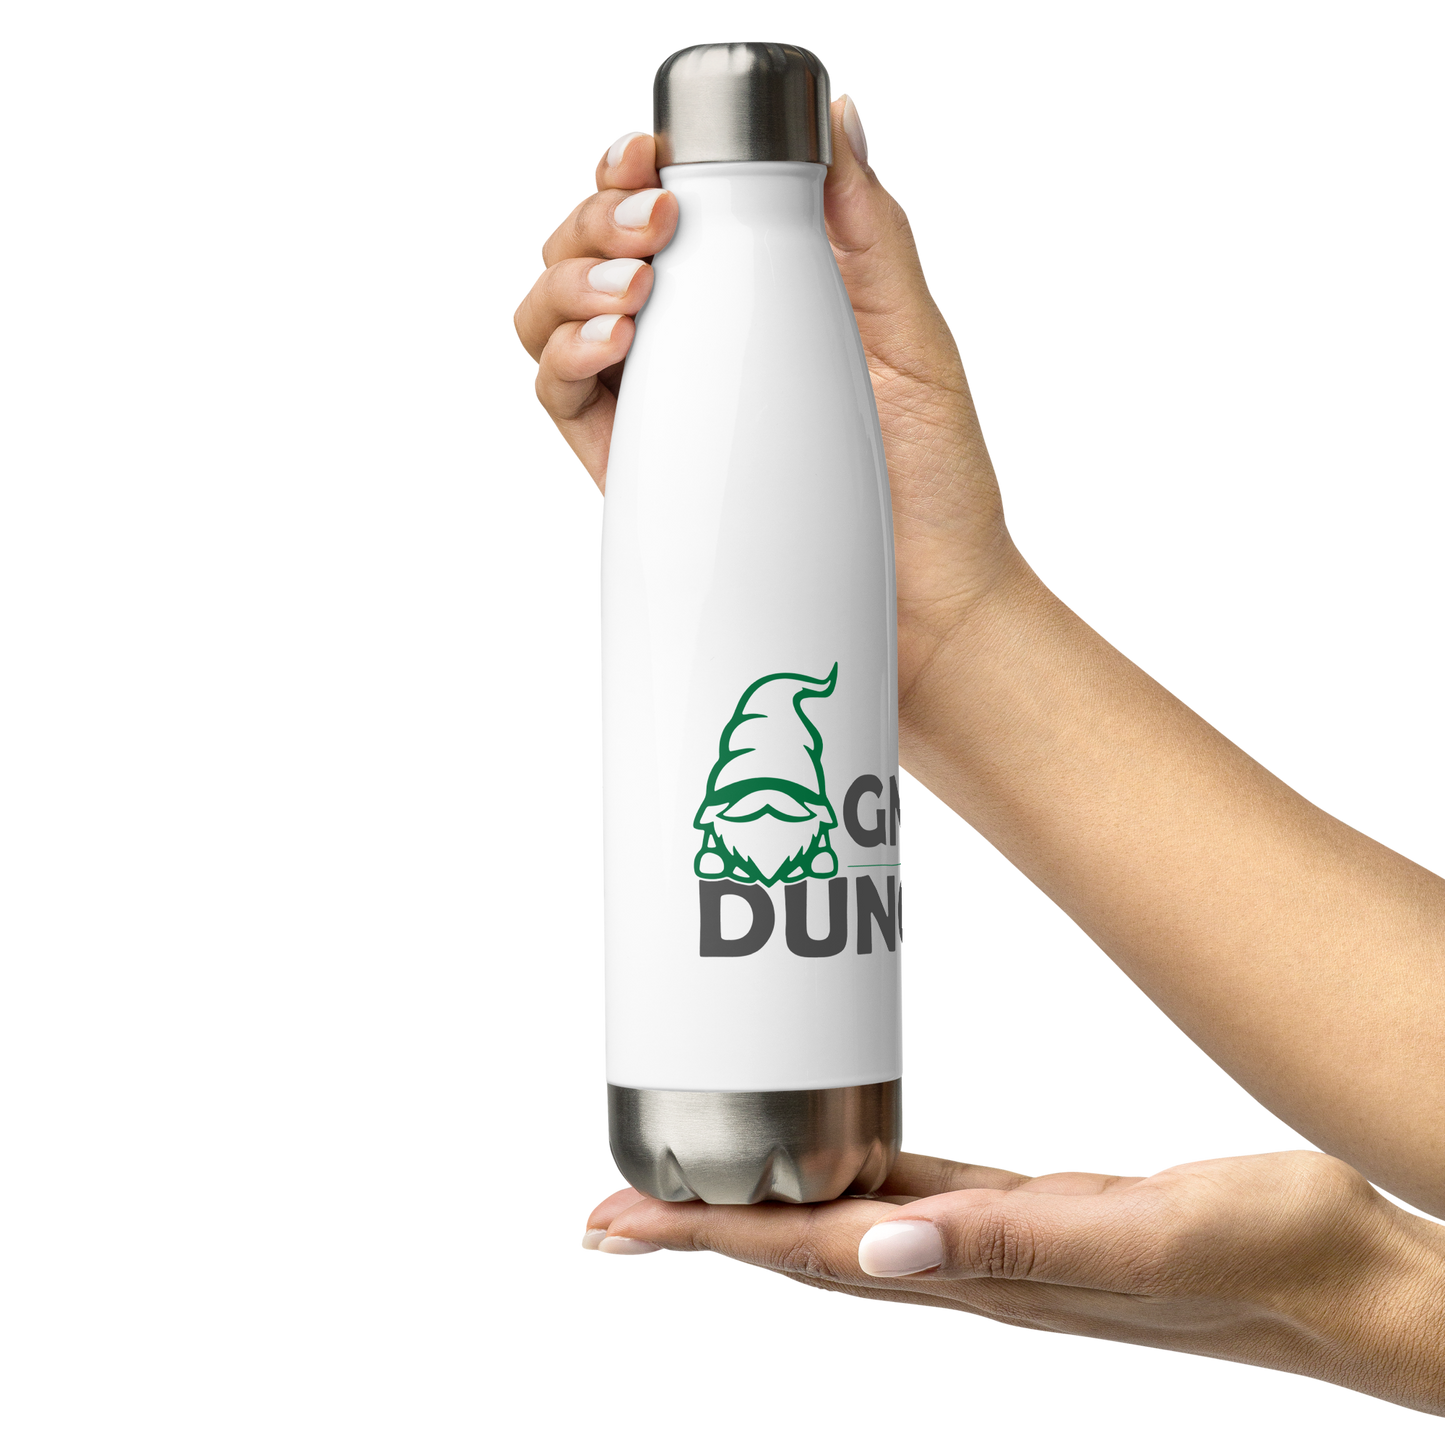 Gnome Dungeon water bottle